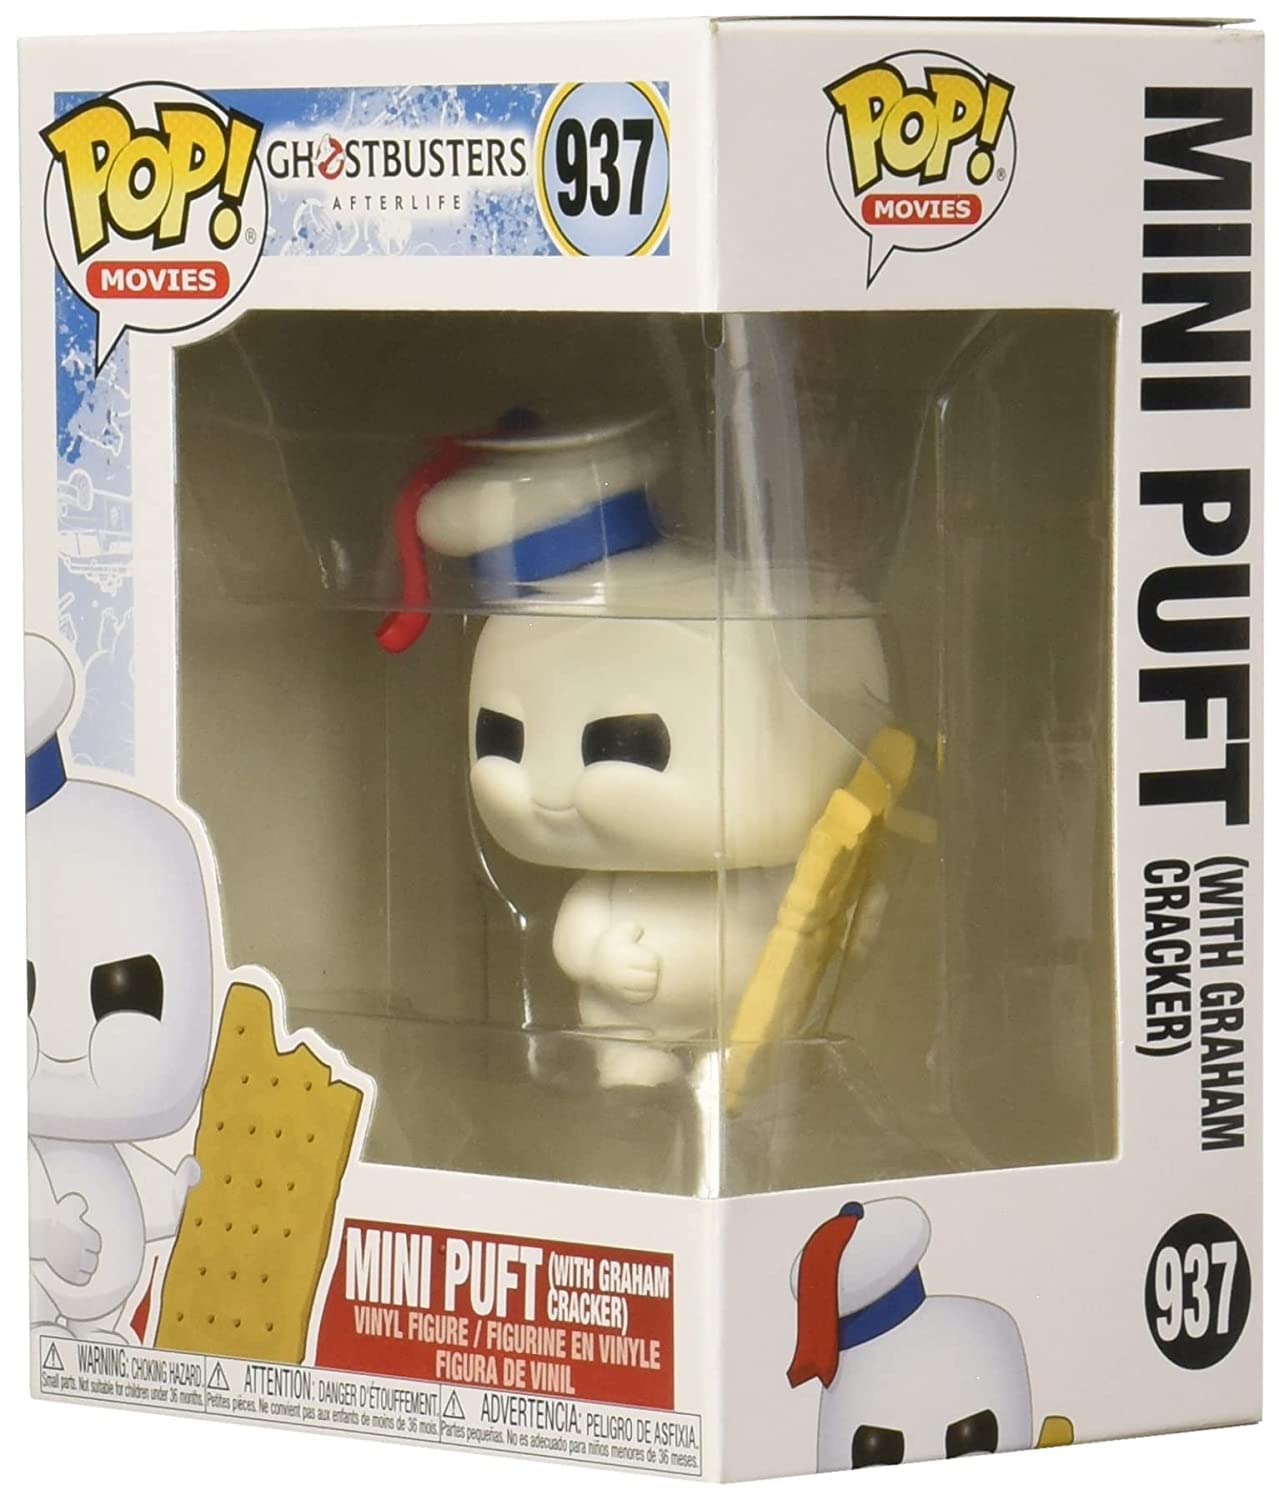 Funko POP! Movies: Ghostbusters Afterlife - Mini Puft with Graham Cracker Multicolor